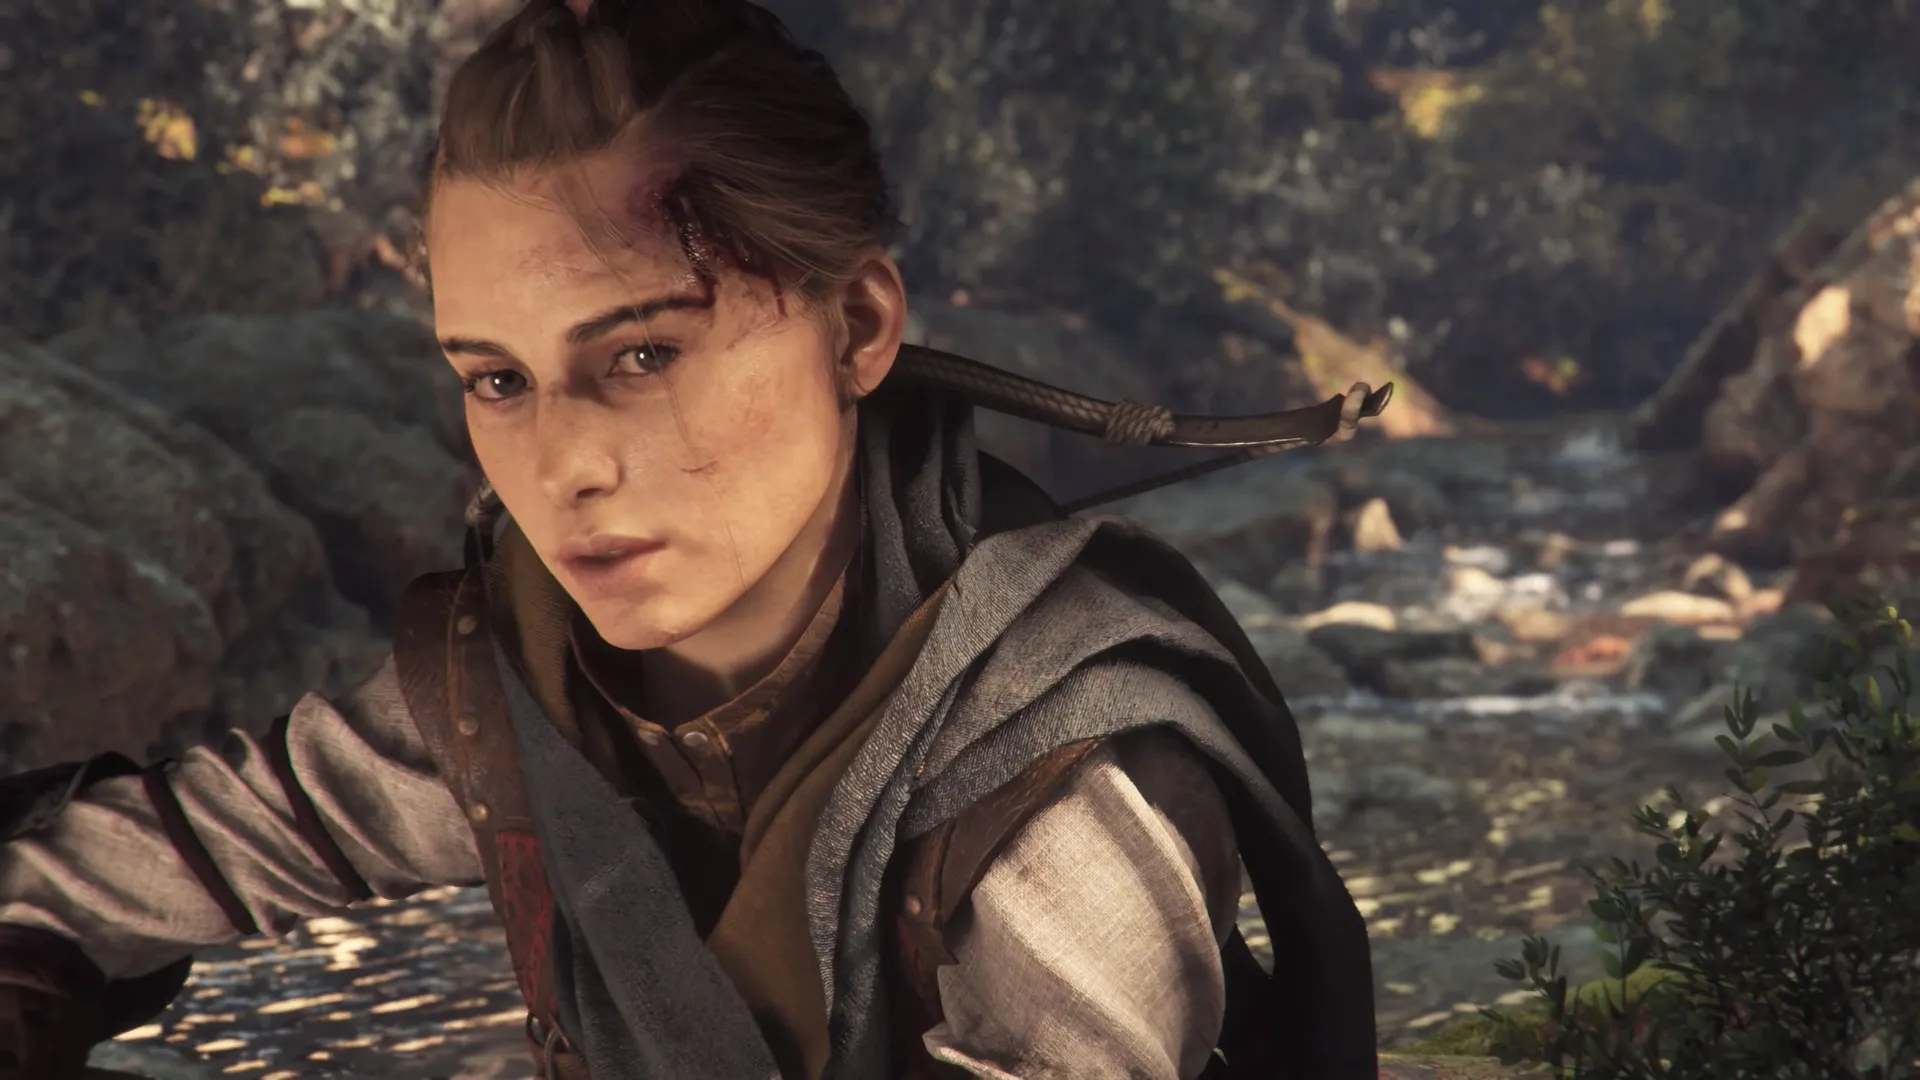 A Plague Tale Requiem Release Date Set For 2022, Coming To Xbox